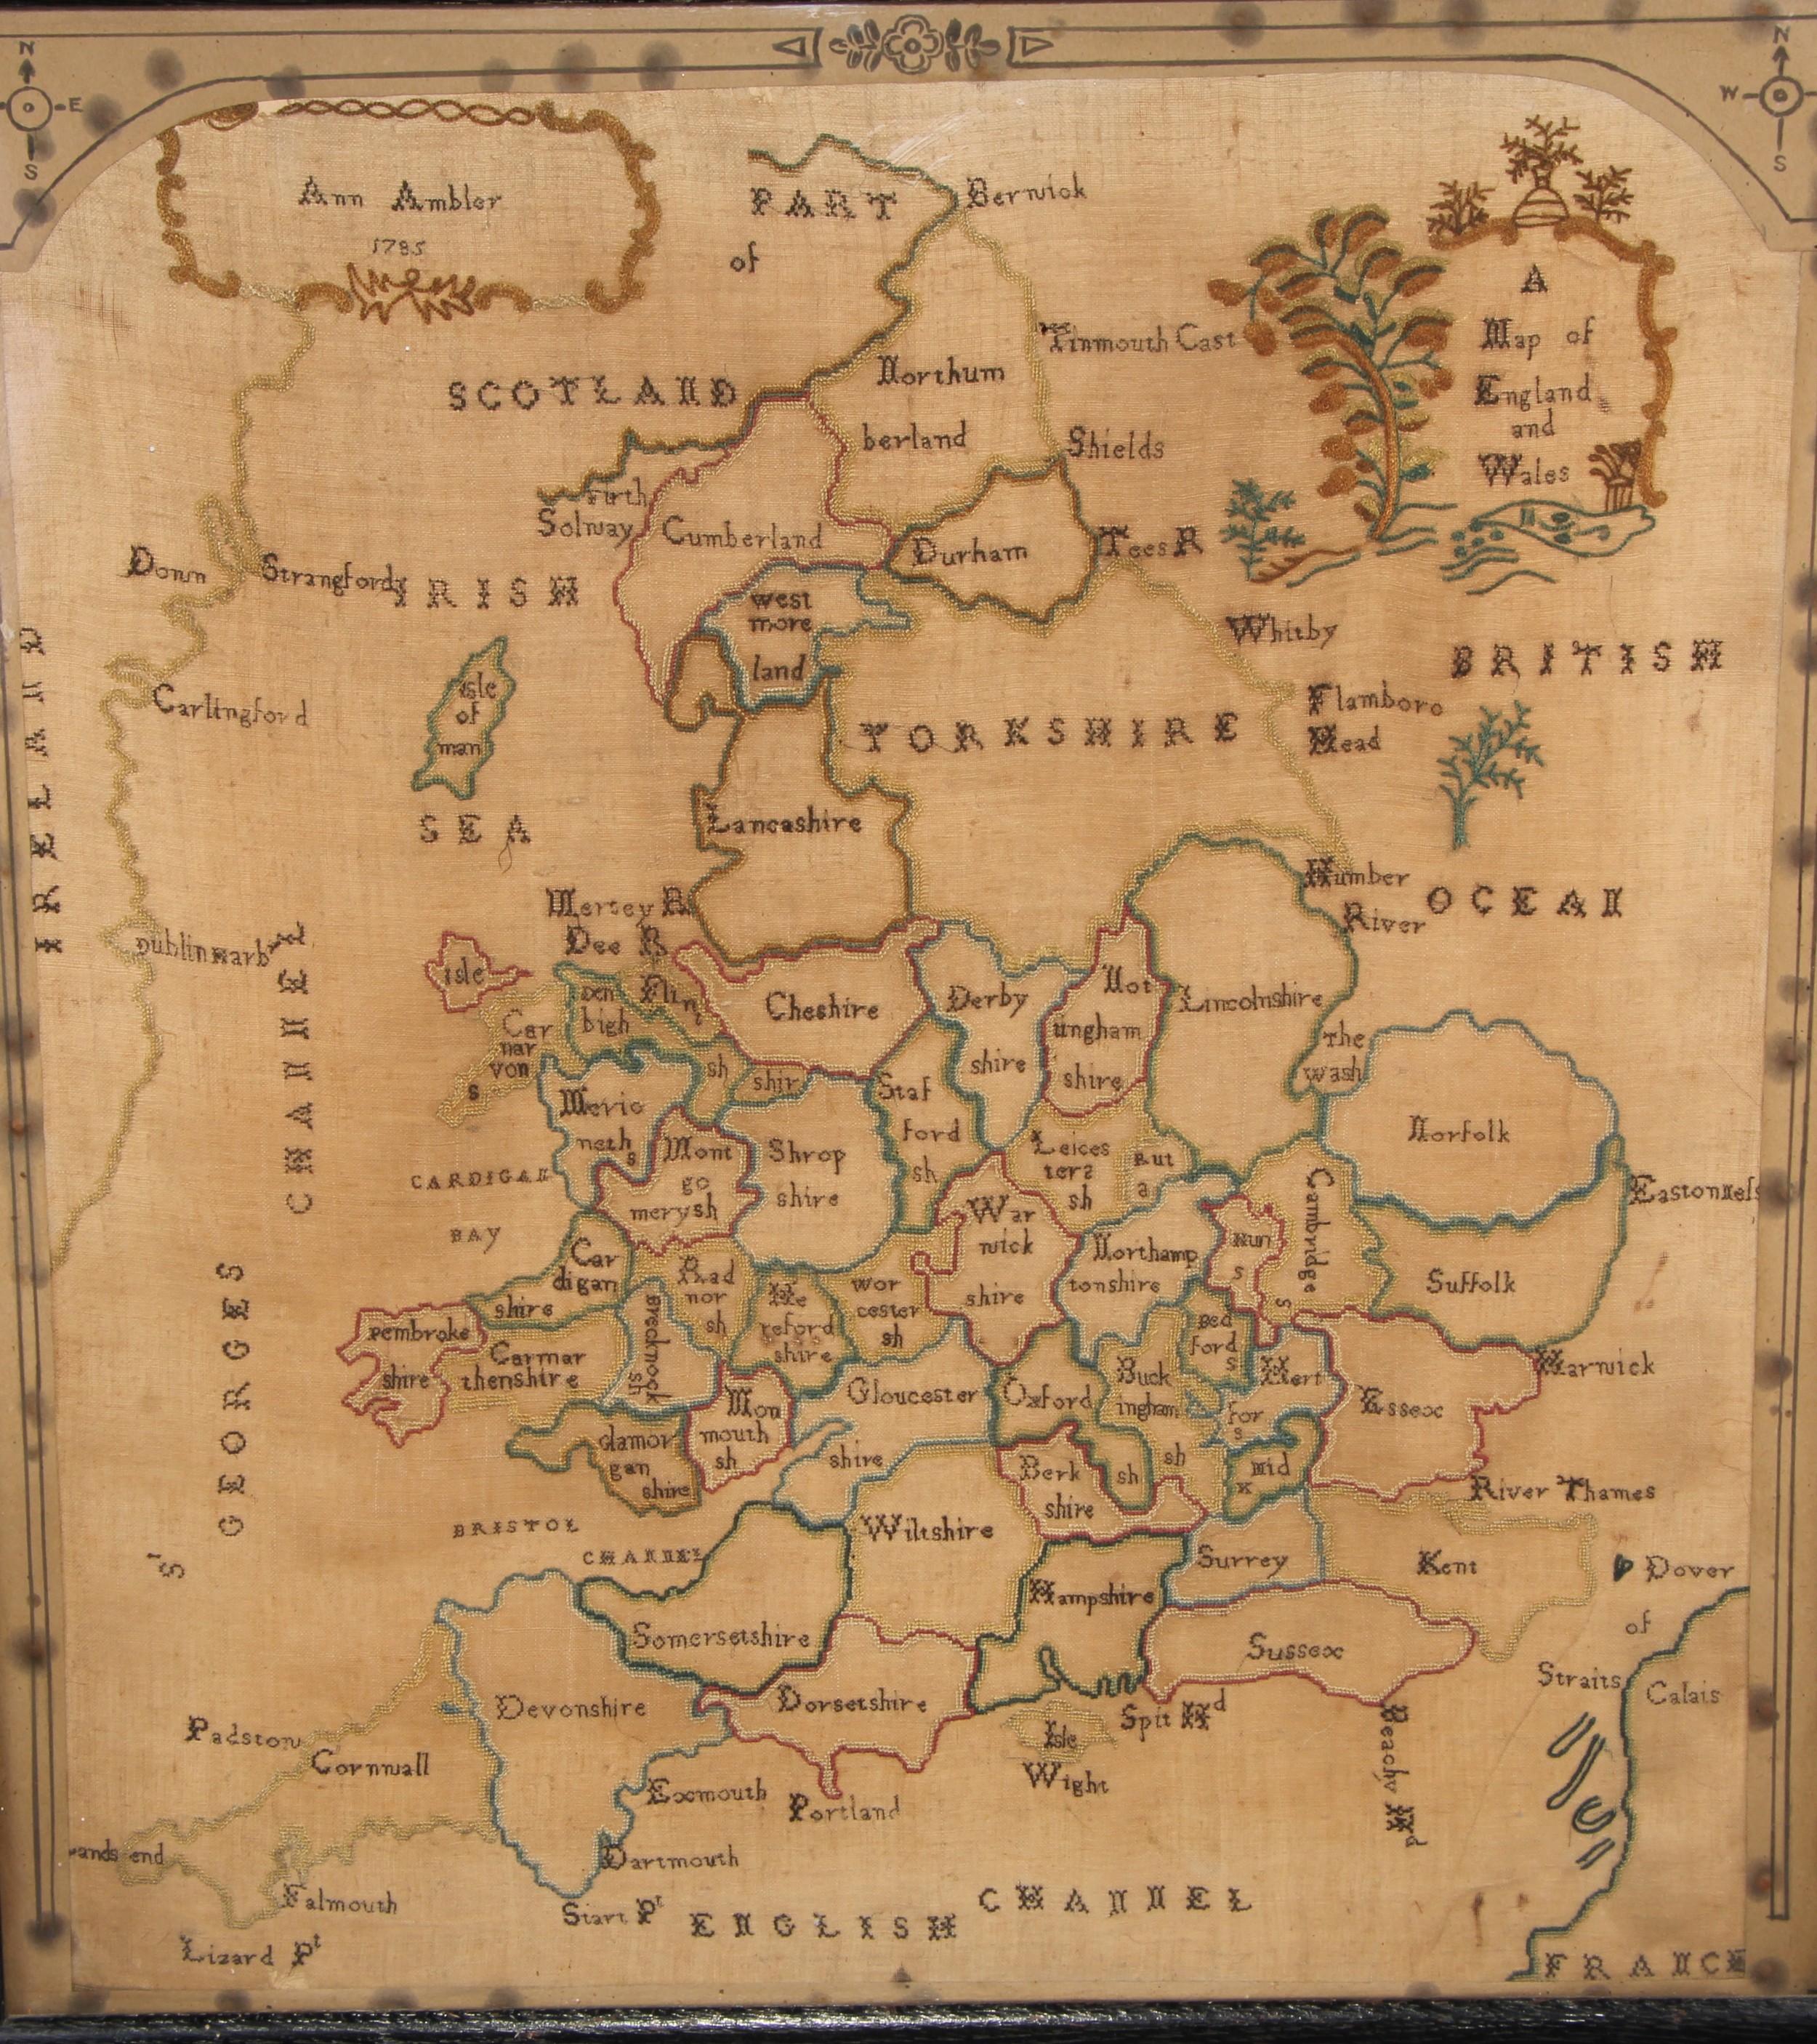 A George III map sampler, A Map of Englnad and Wales, by Ann Ambler, 1785, 55cm x 51cm, c.1785, - Image 2 of 2